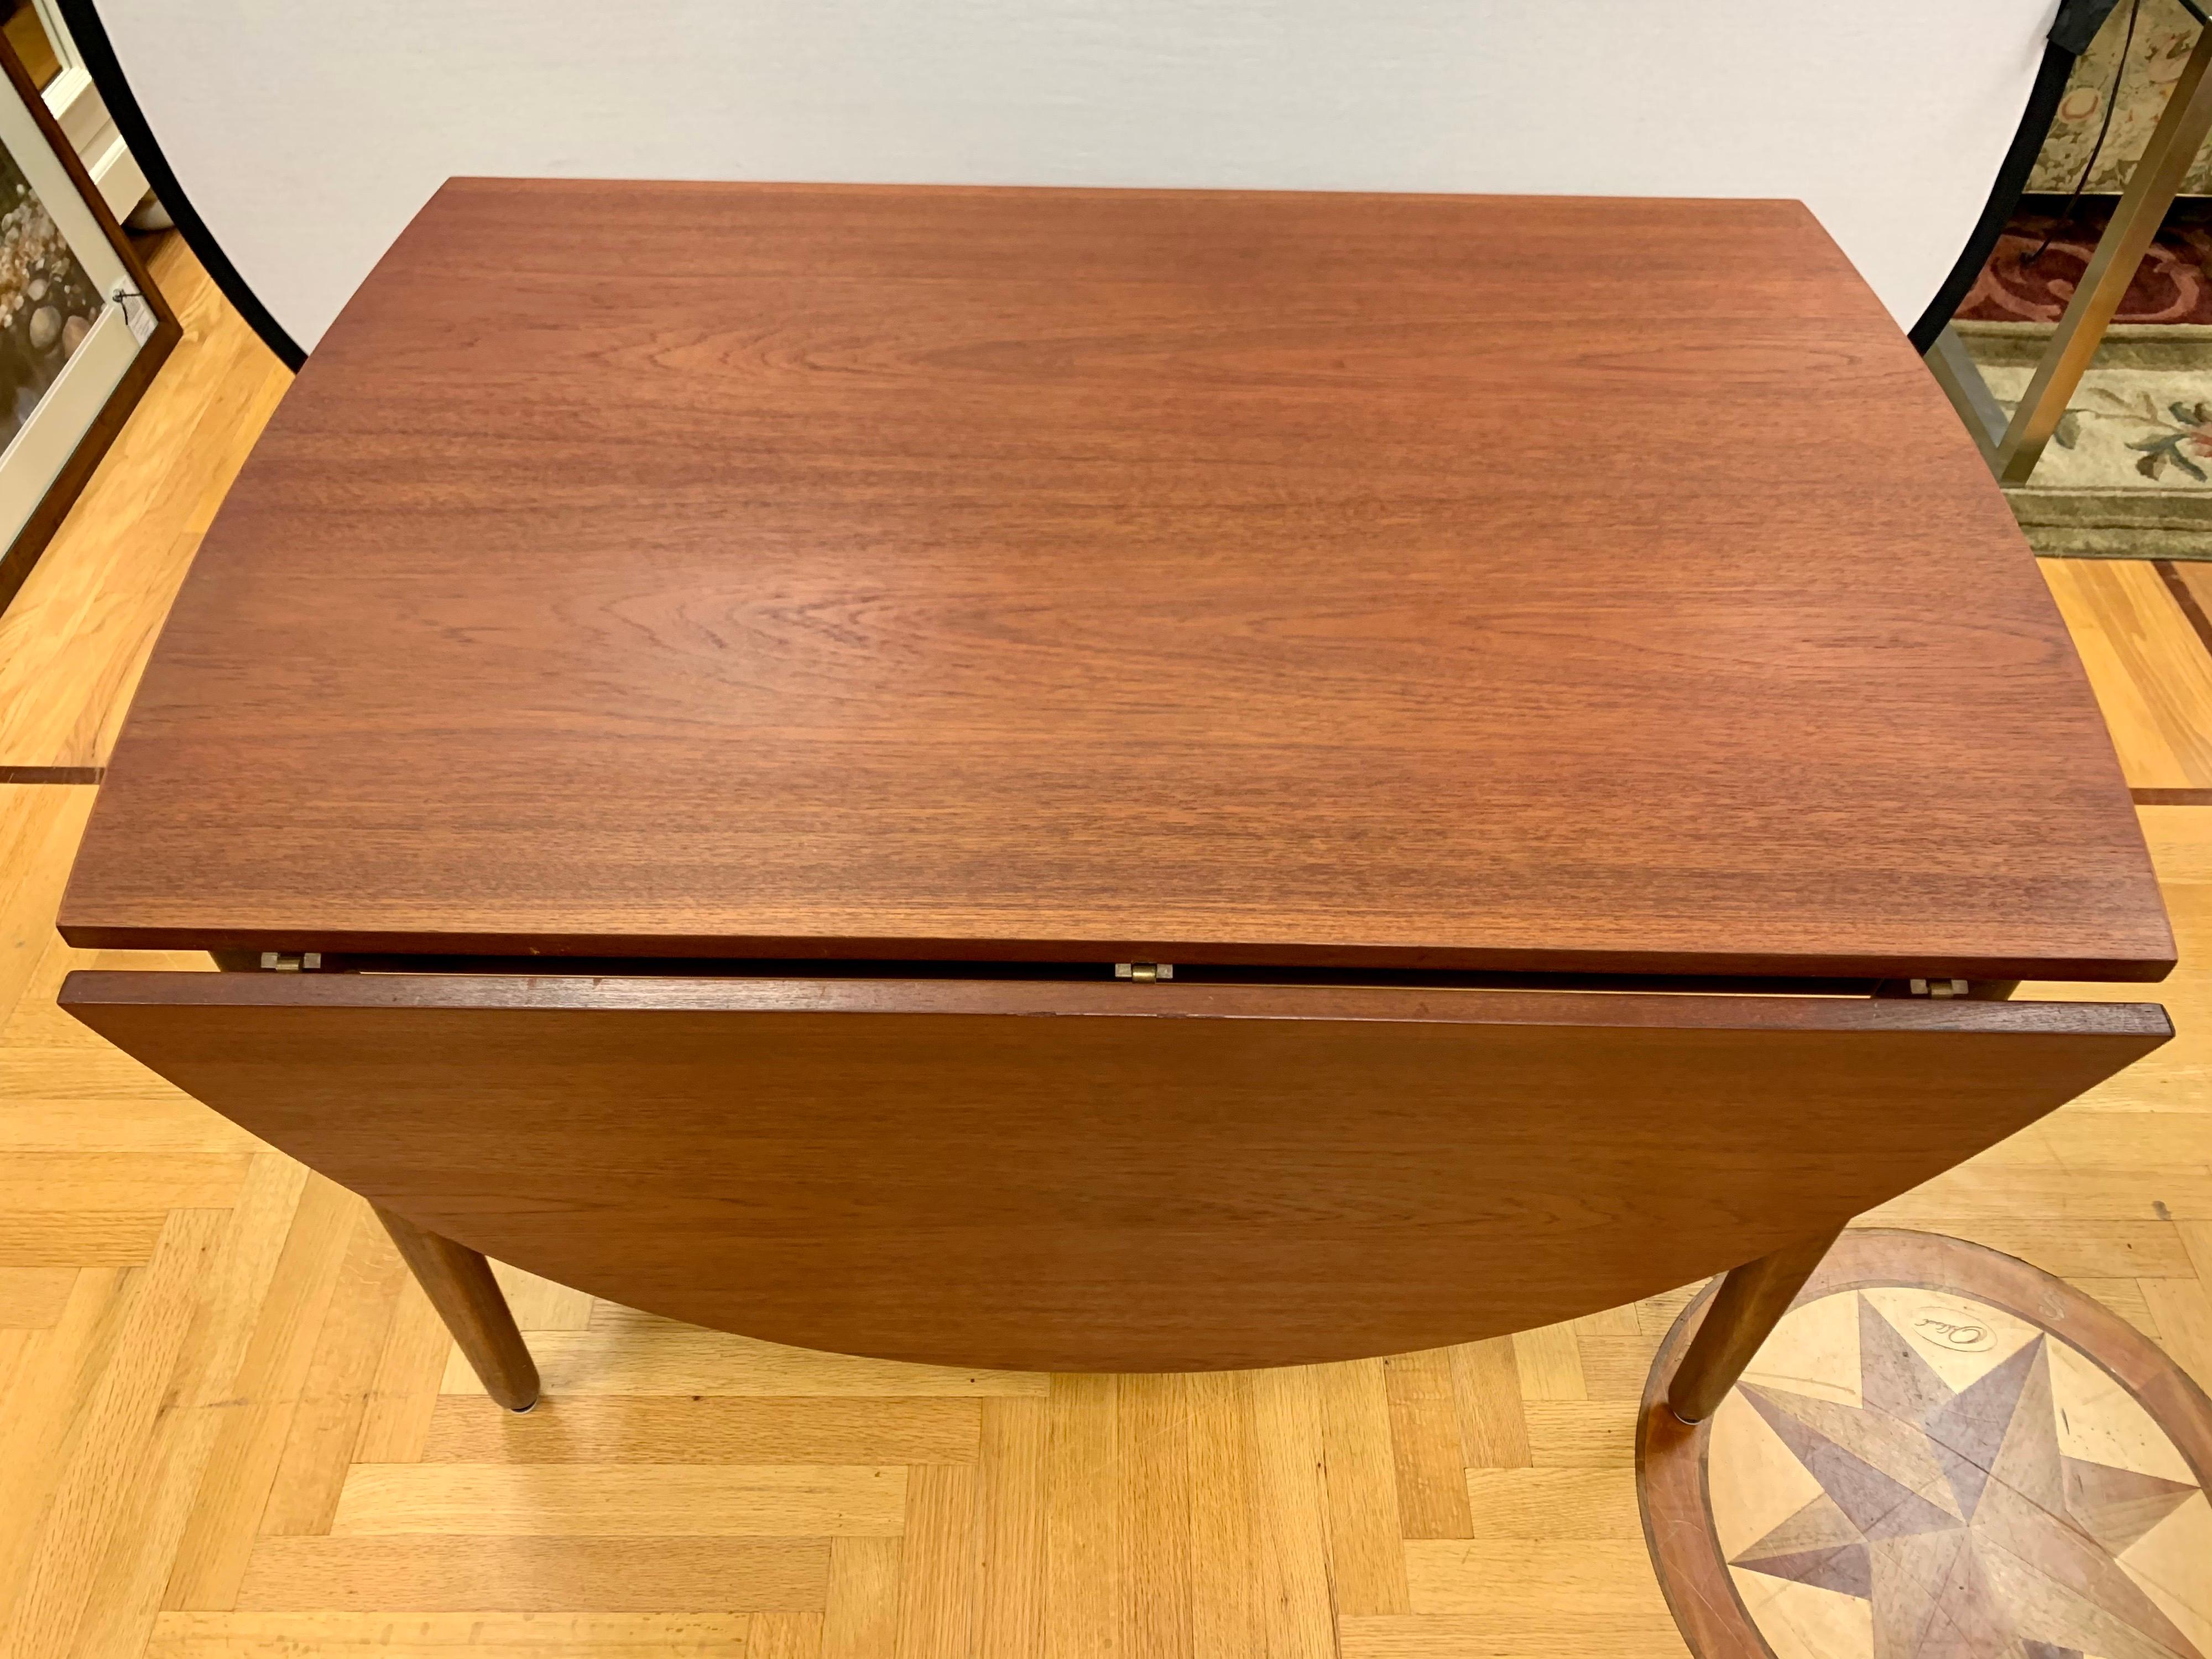 Mid-20th Century Signed Dining Table by Arne Vodder for Vamo 1958 Danish Mid-Century Modern